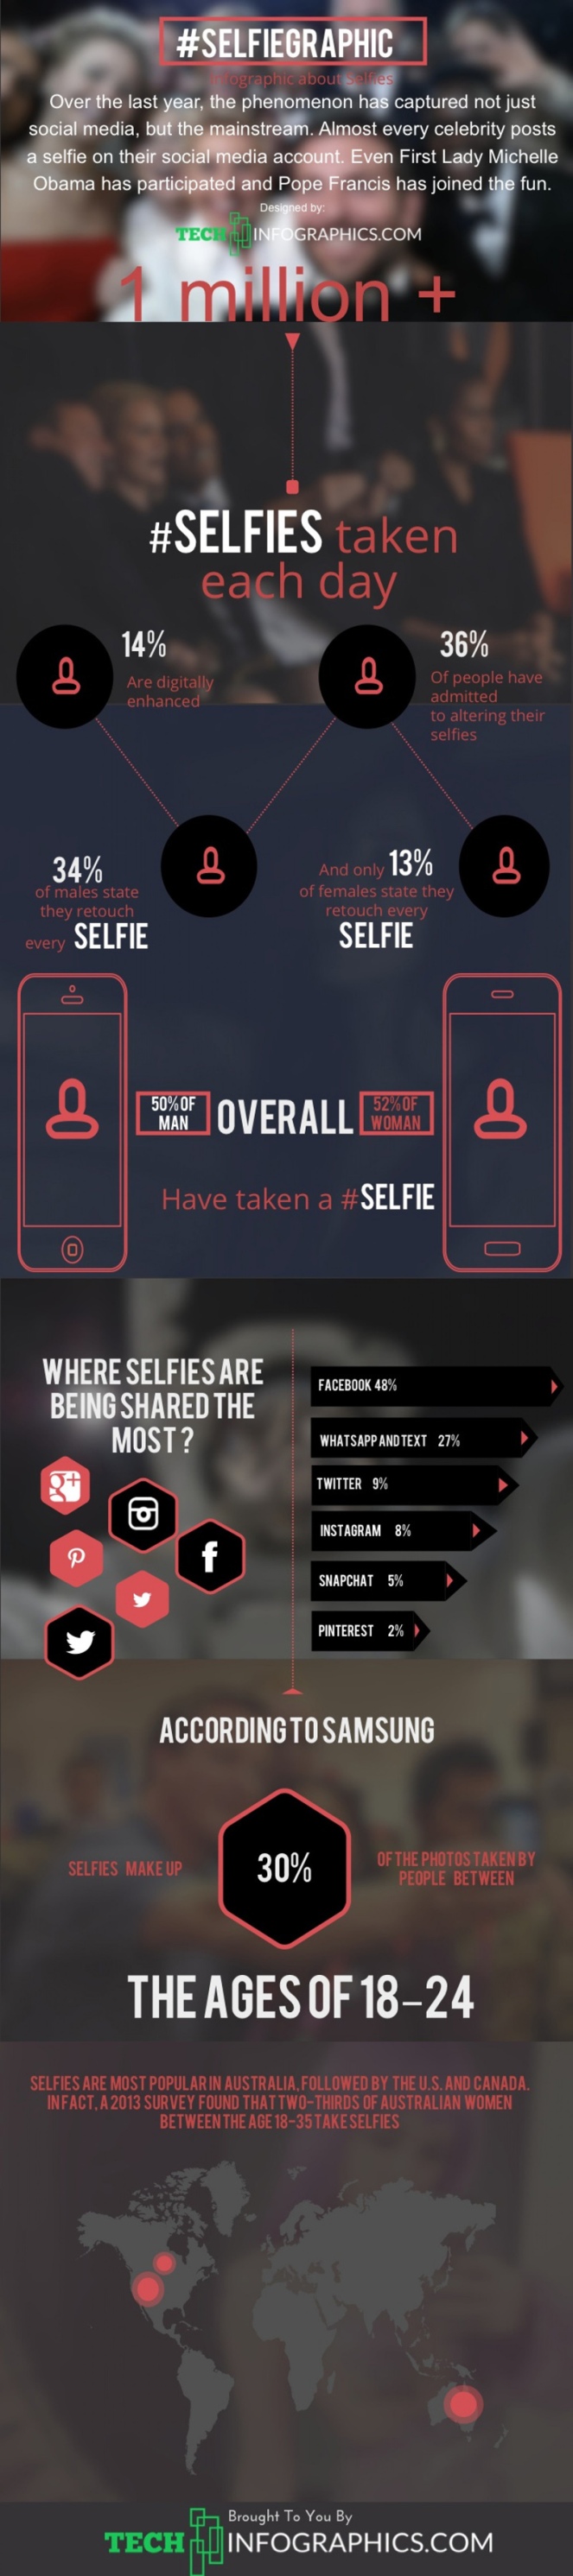 selfiegraphic-infographic-about-selfies_5327657ebe484_w1500